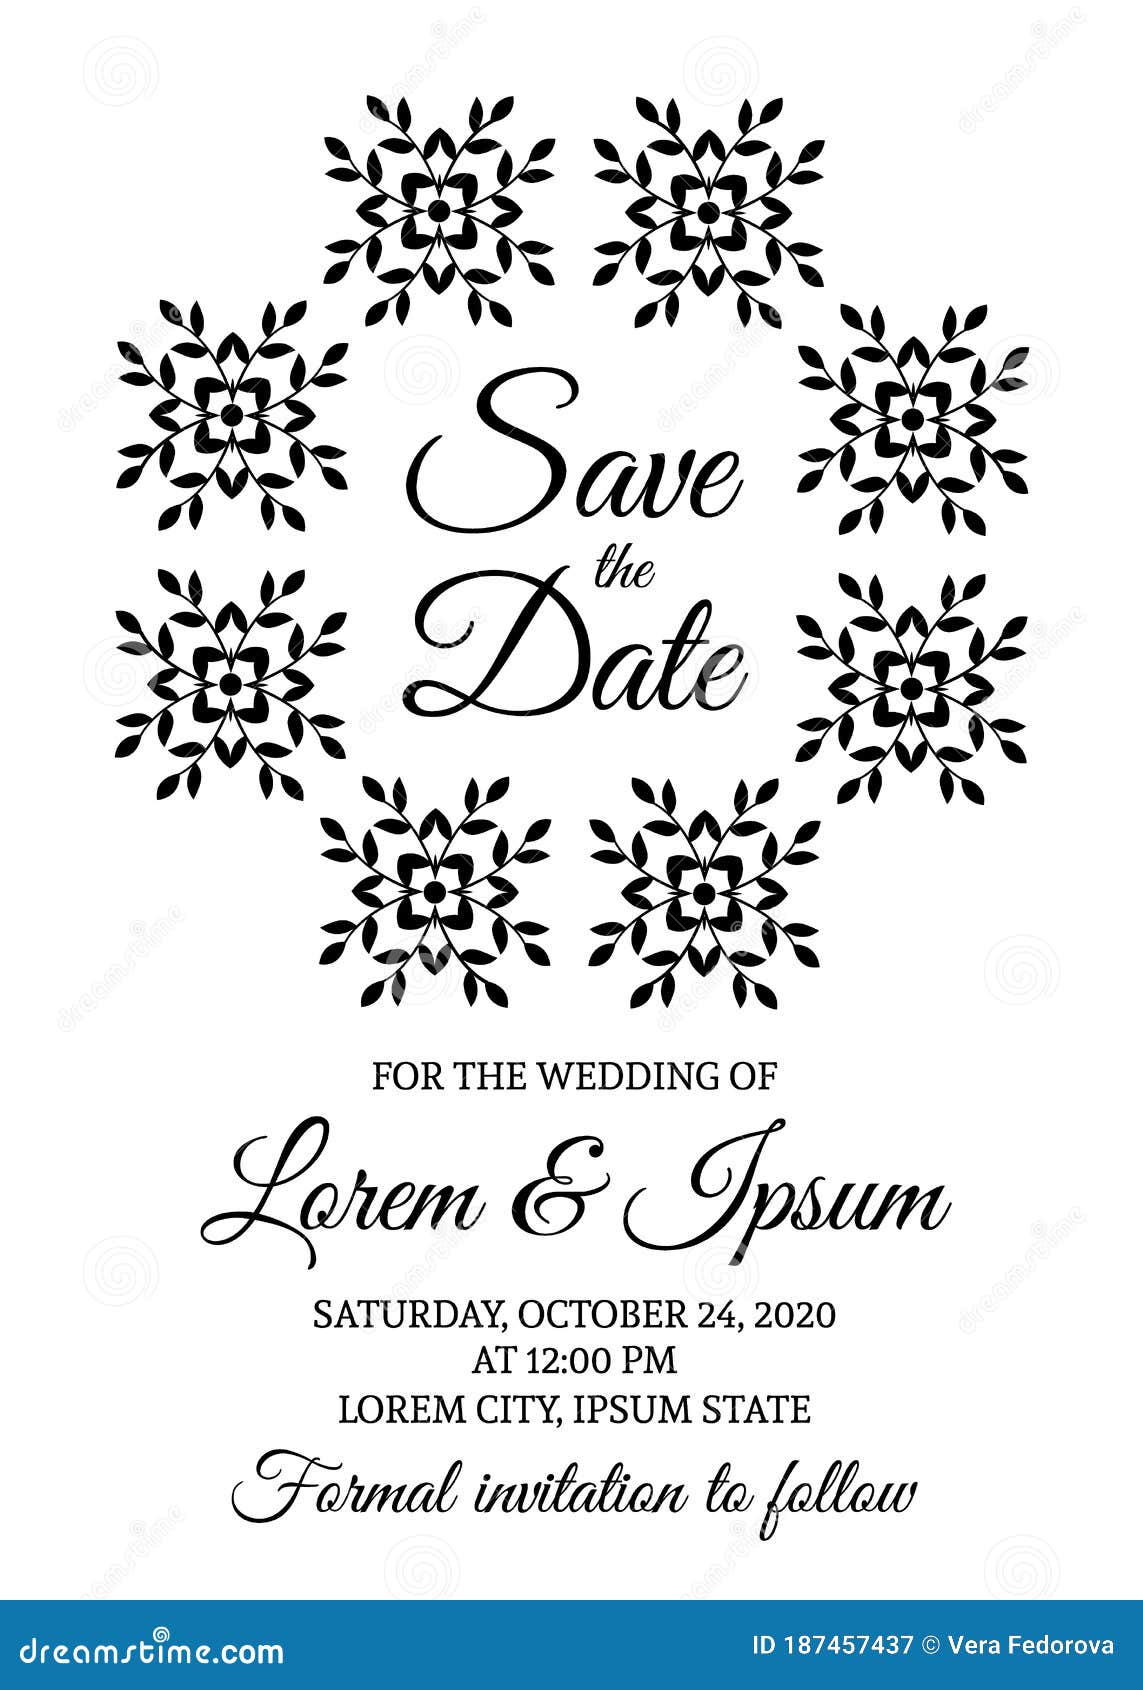 save the date card template. black and white wedding invitation